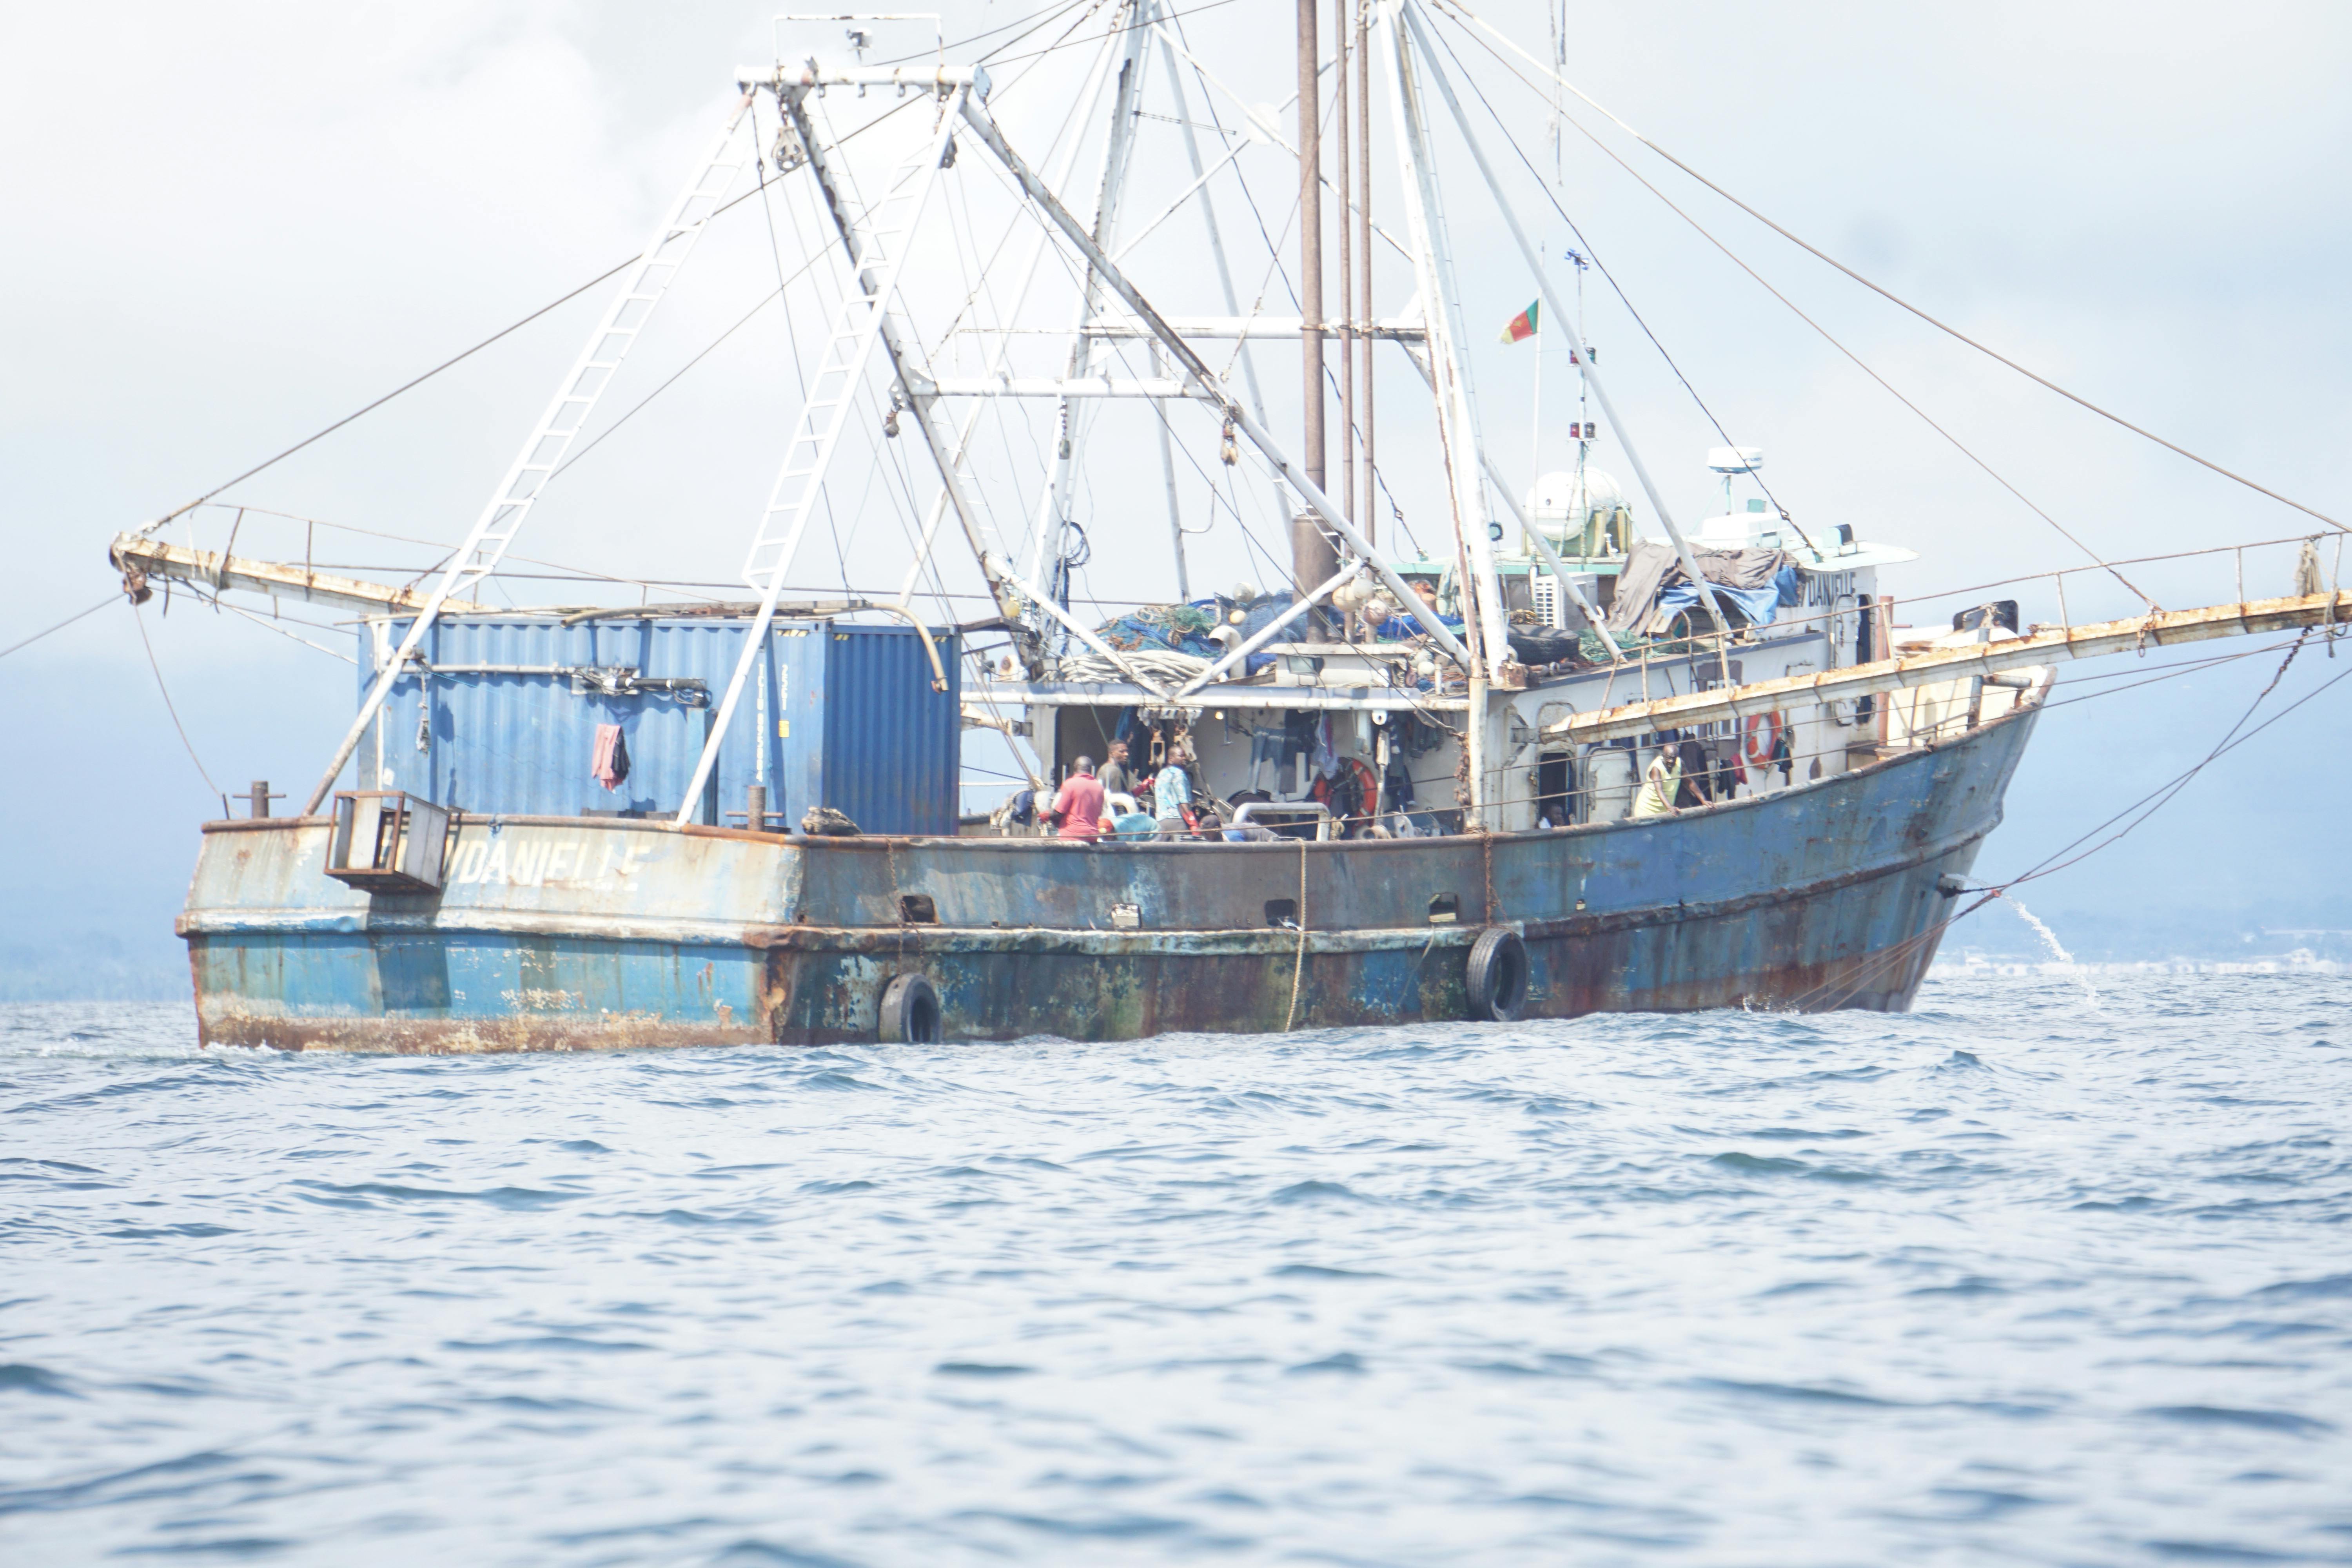 Improving fishery management and stopping IUU fishing in Cameroon